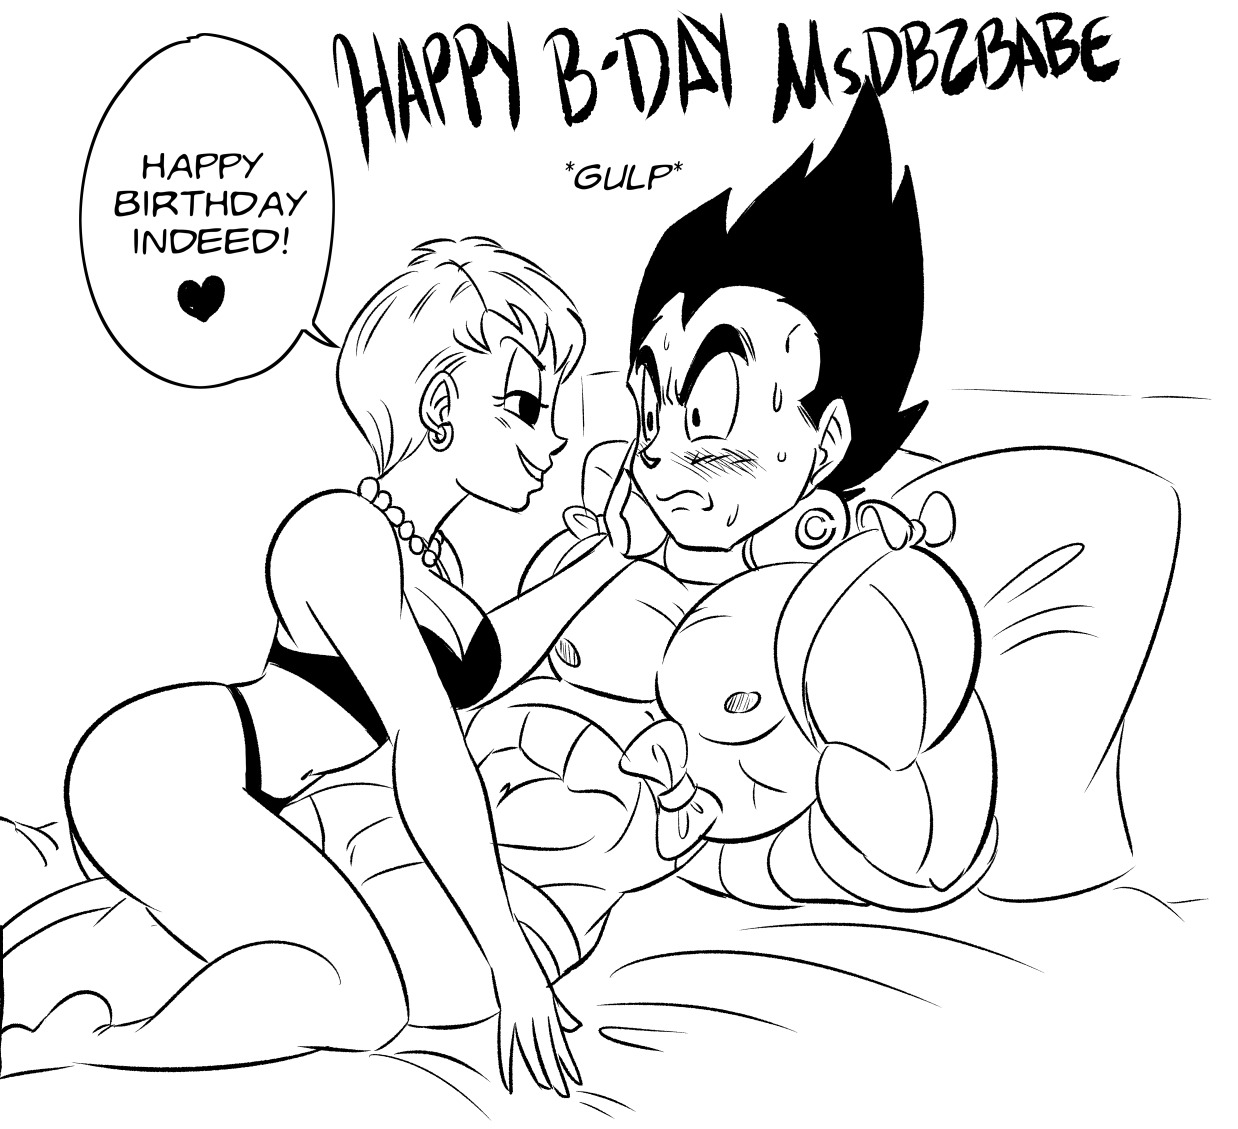 This was a birthday gift to the wonderful @msdbzbabe. Made two version cause I just